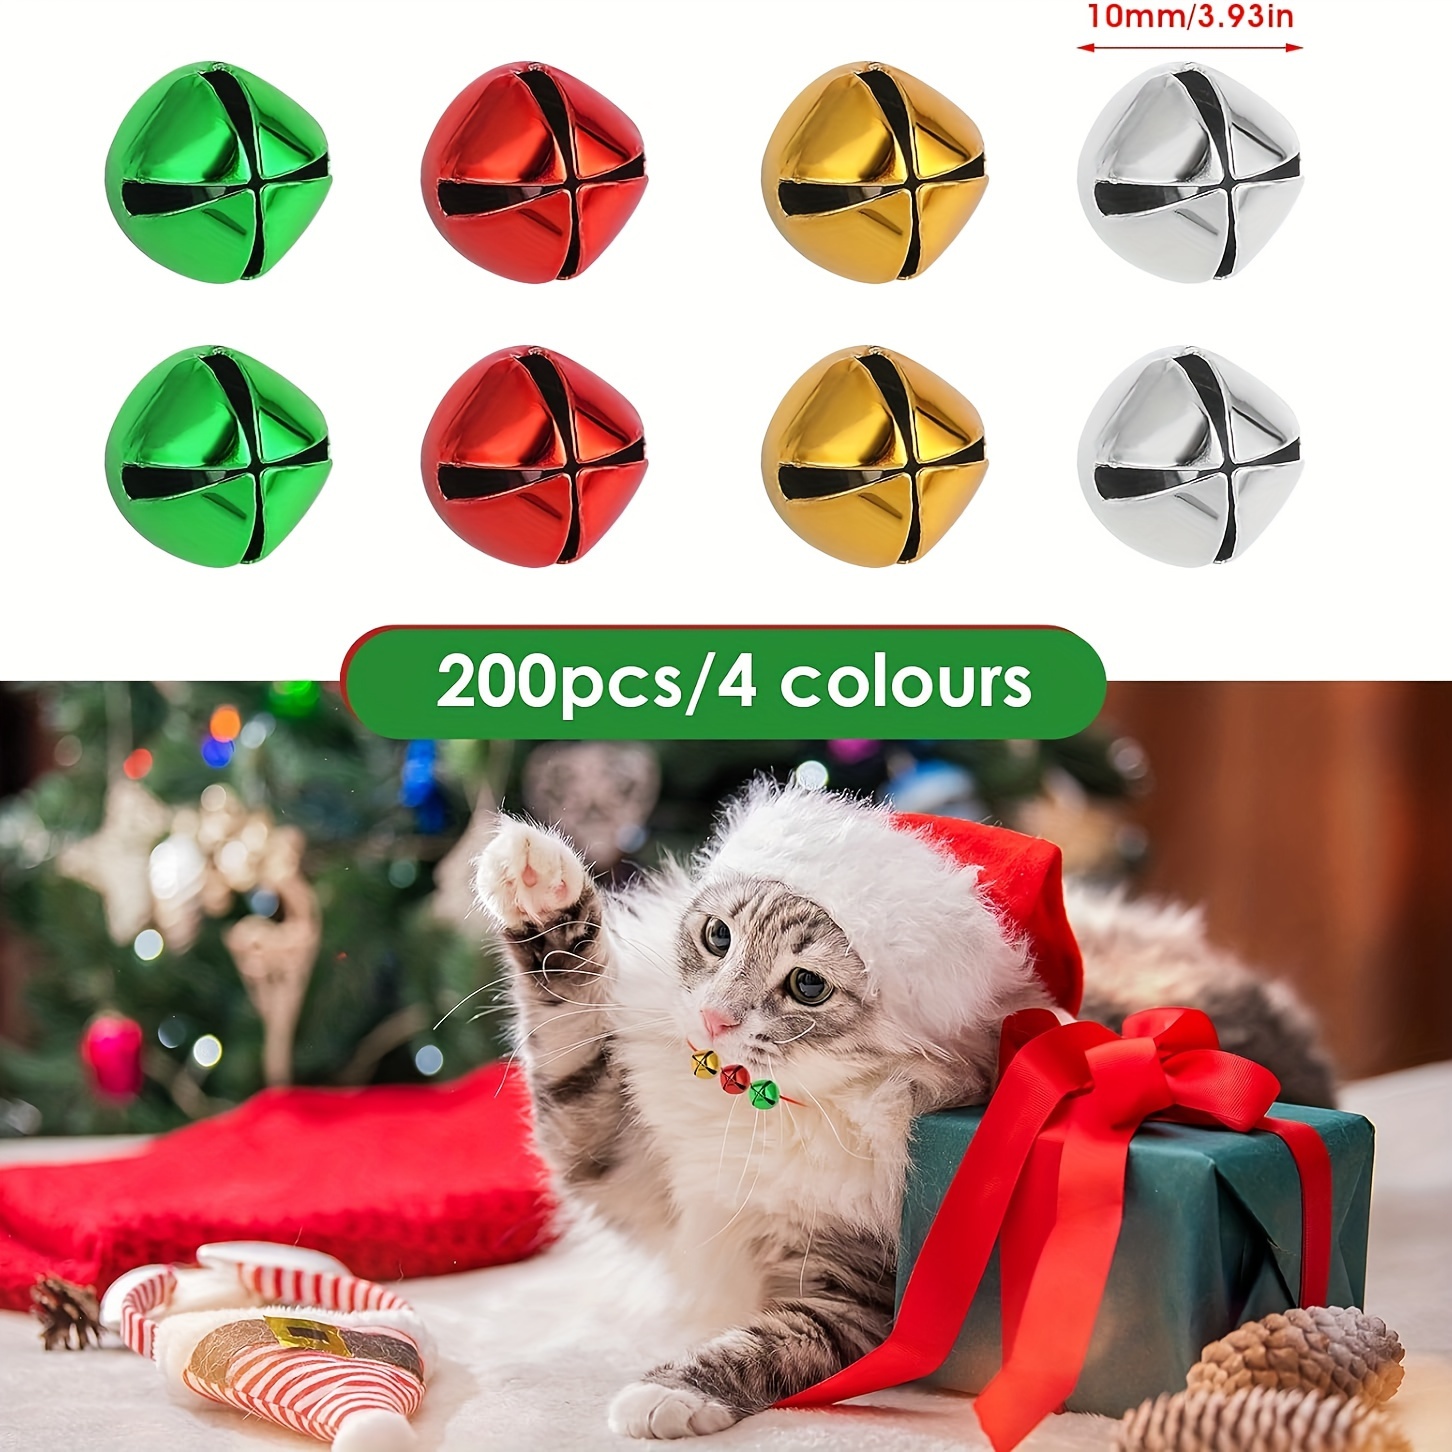 200pcs, Jingle Bells, 10mm/0.4 Inch Christmas Bells With 20m Cords,  Colorful DIY Mini Craft Bells Bulk For Christmas Home And Pet Decorations  Xmas Dec